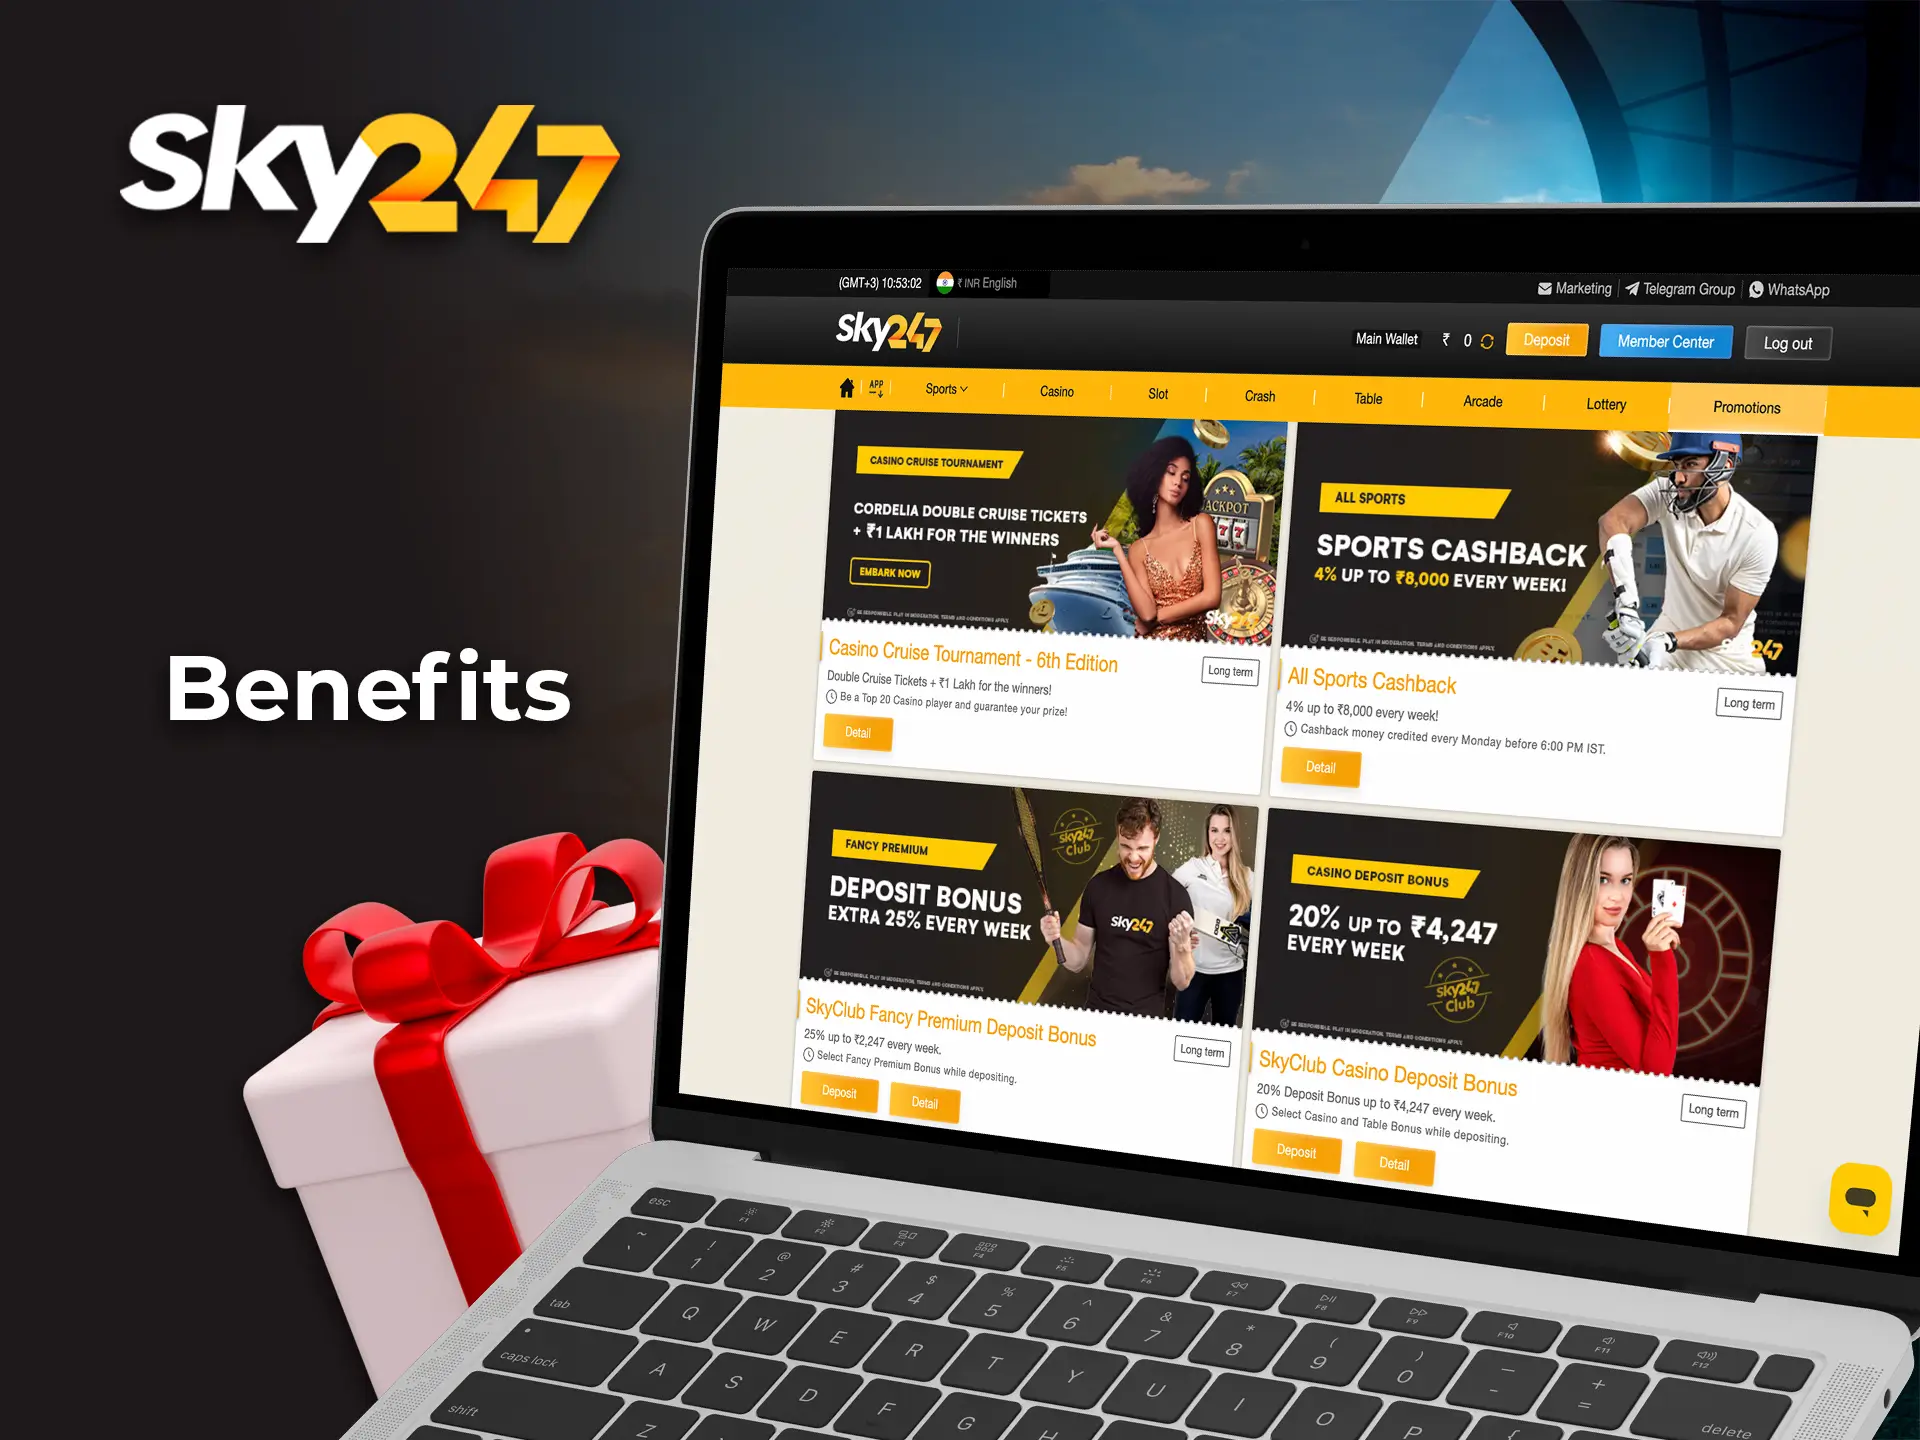 Take a good opportunity to win big with bonuses from Sky247 Casino.